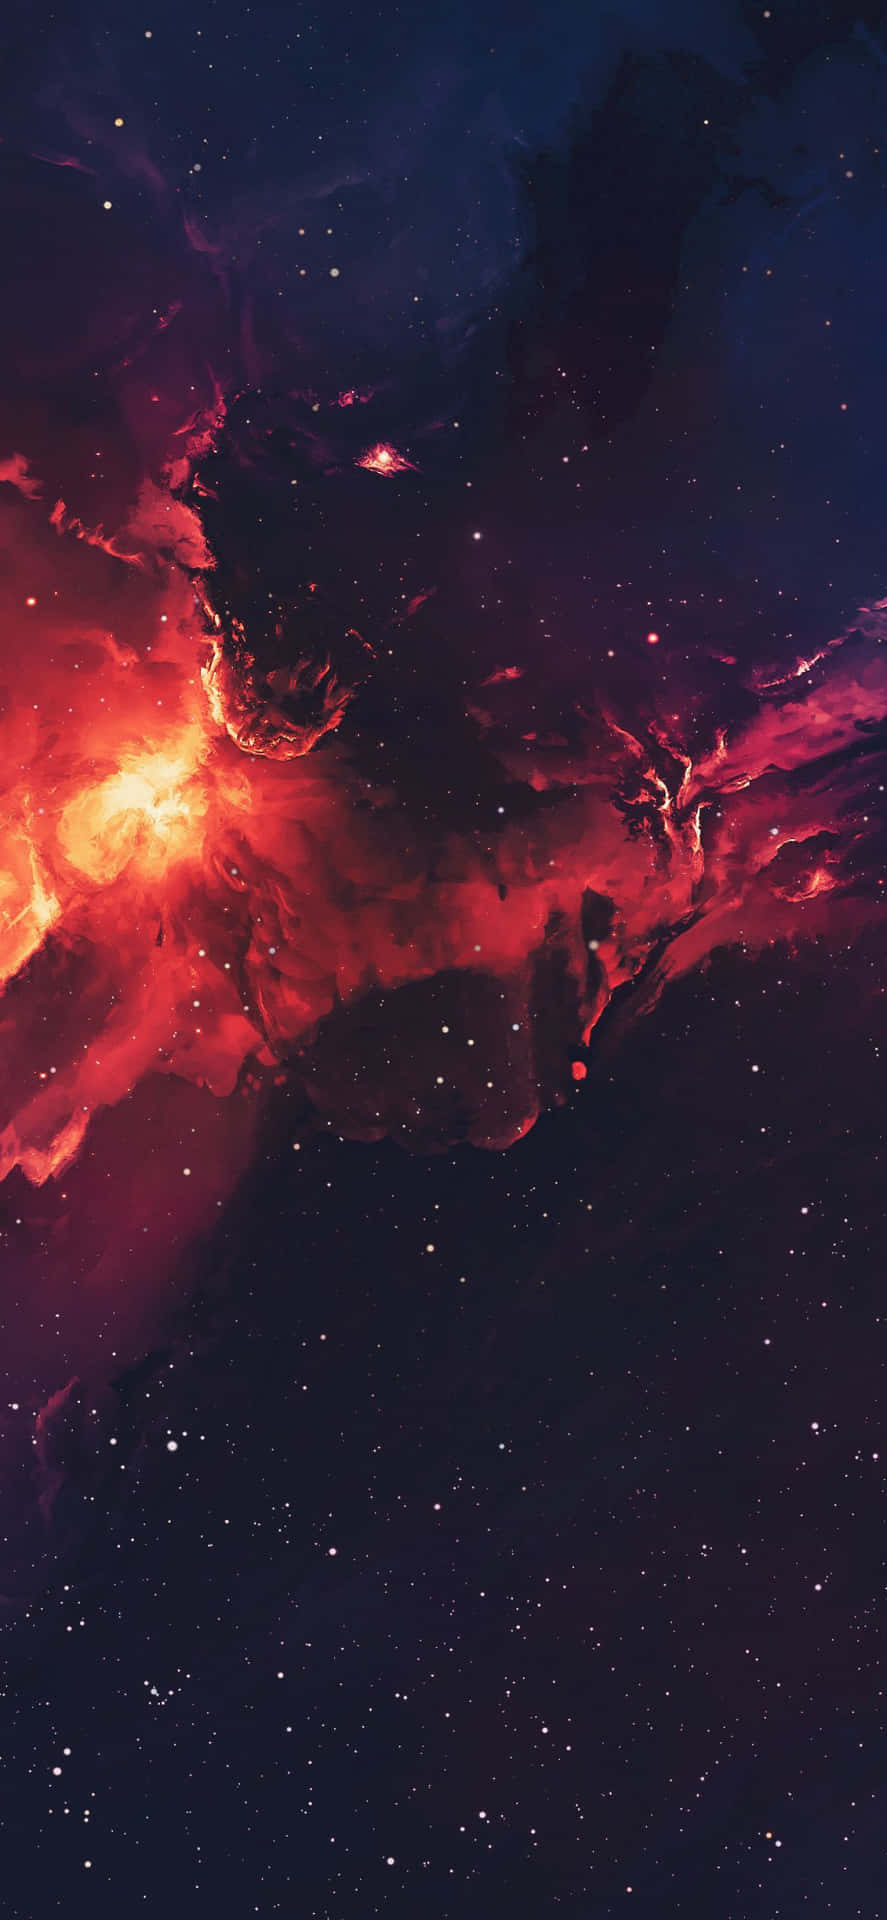 Trippy Galaxy With Red Space Dust Wallpaper